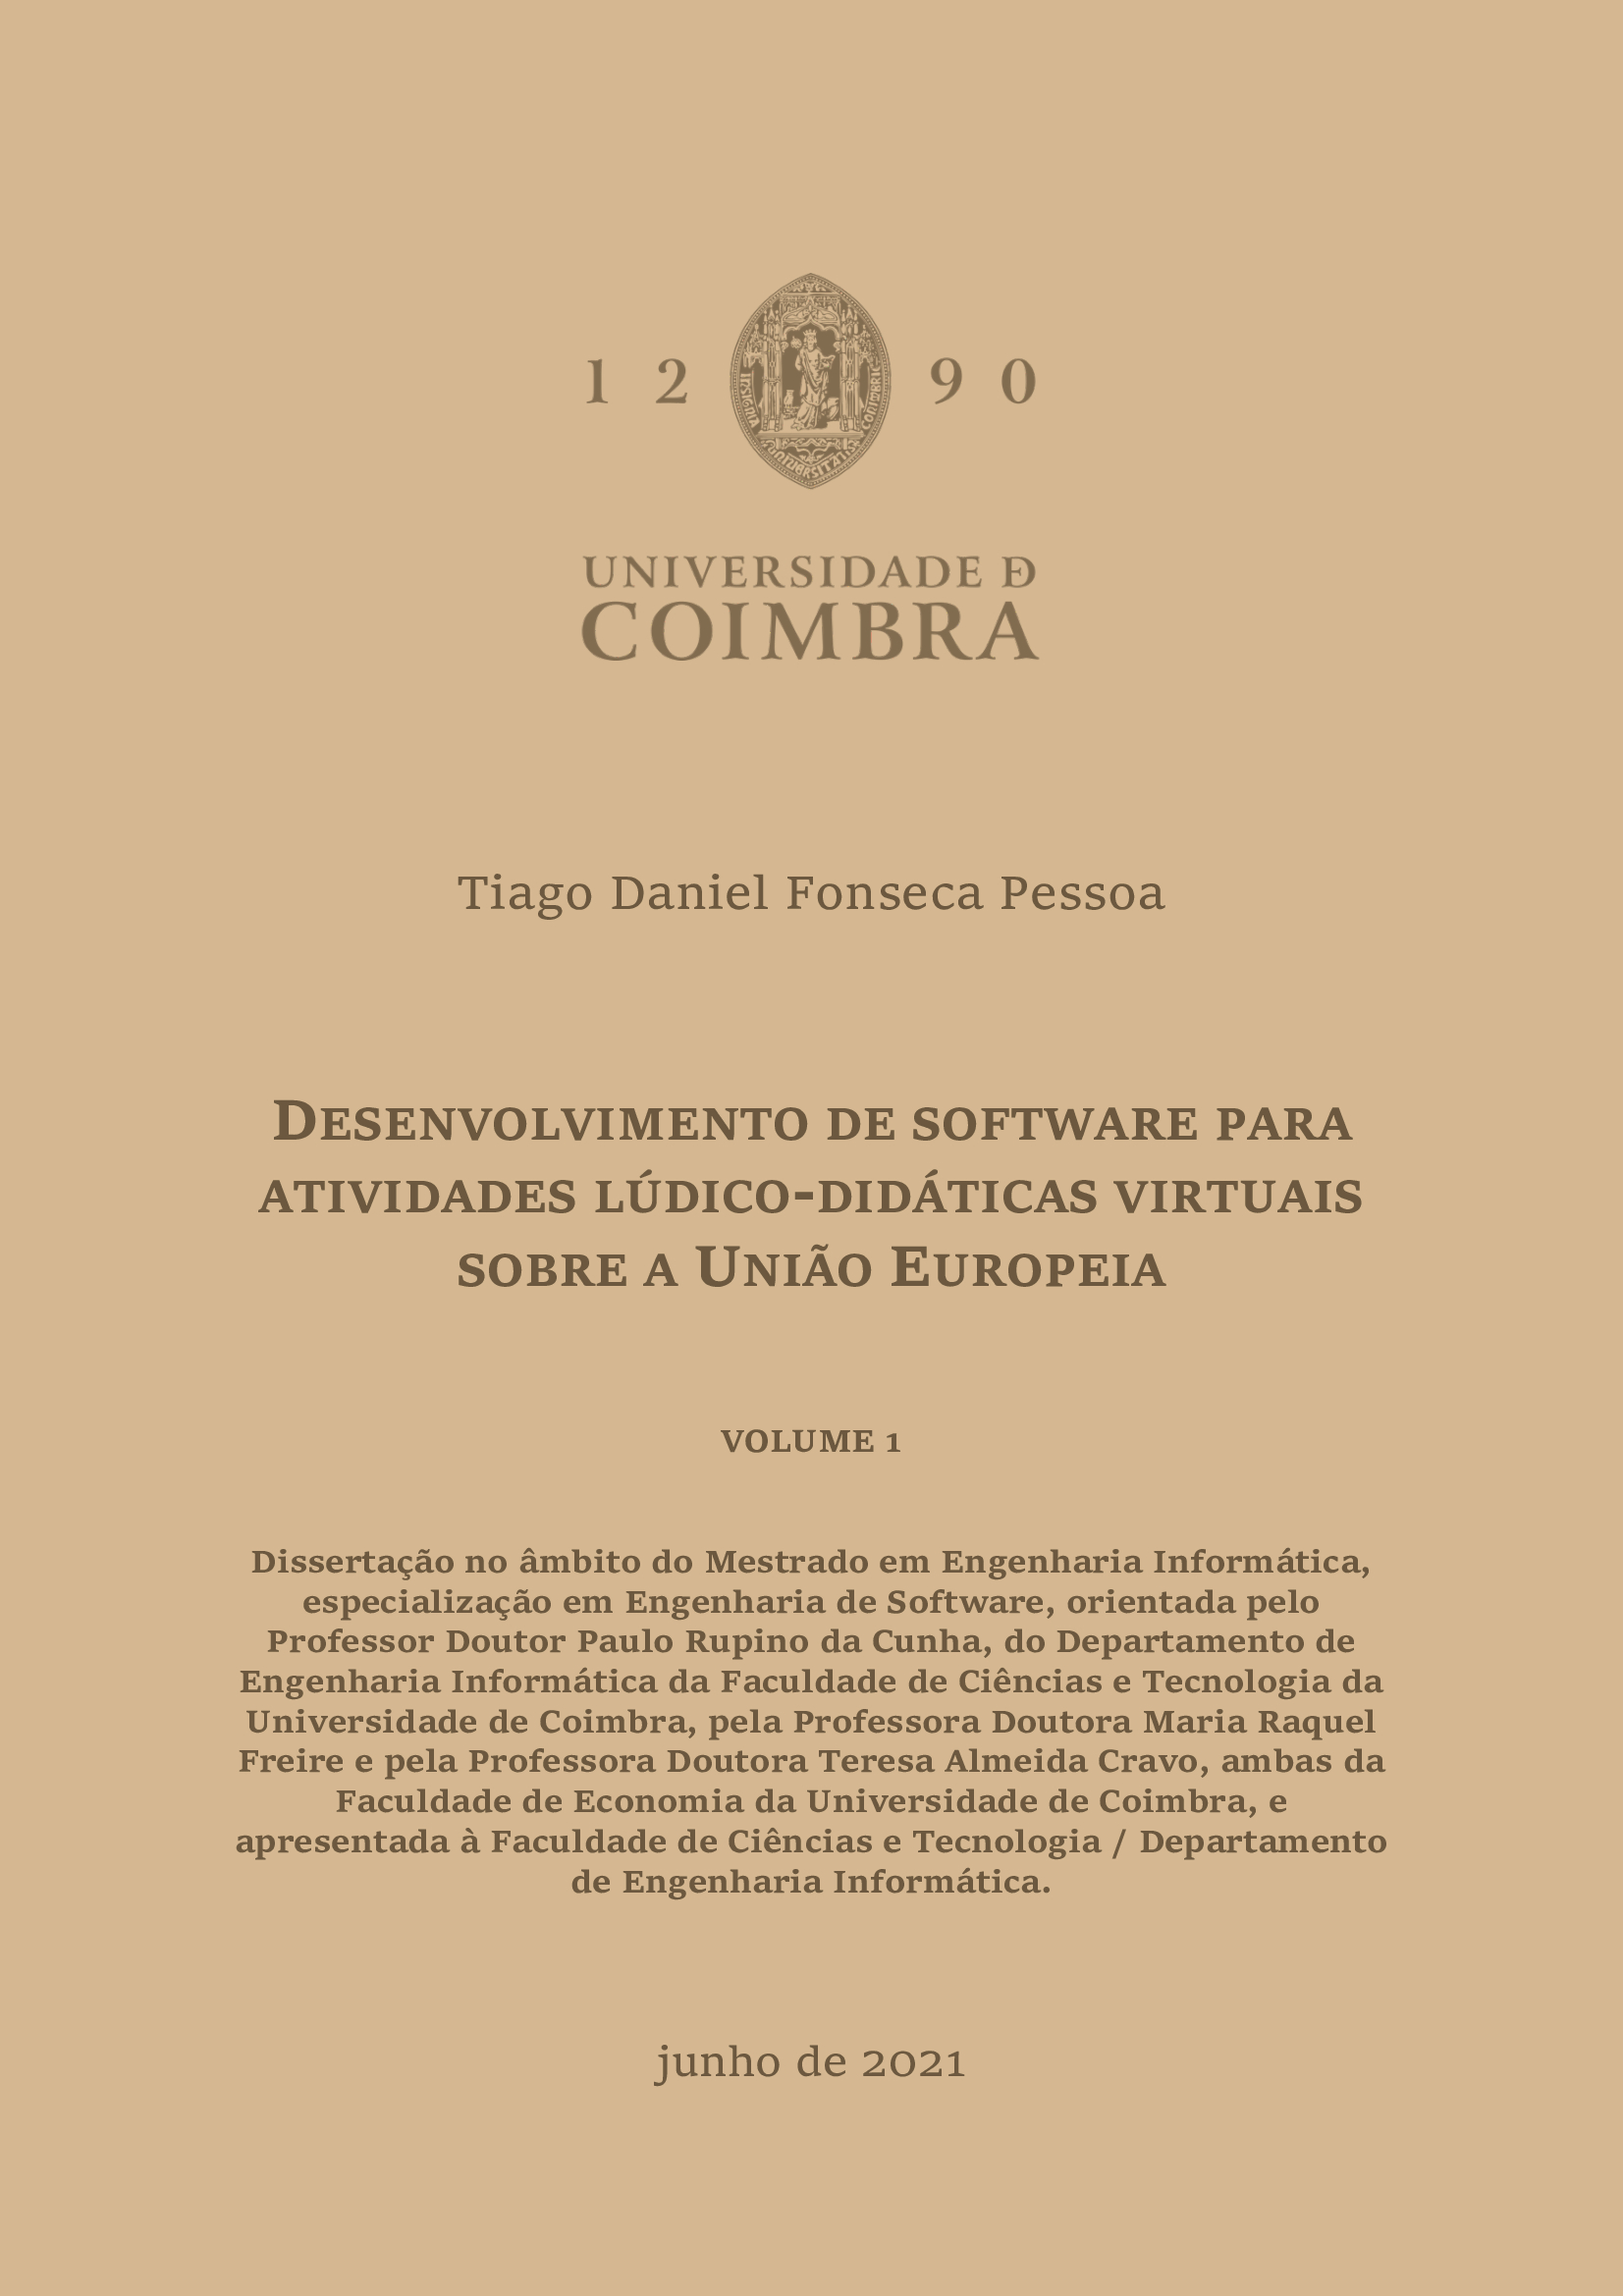 Software Development for Virtual Playing-Didactic Activities about the European Union (In Portuguese)